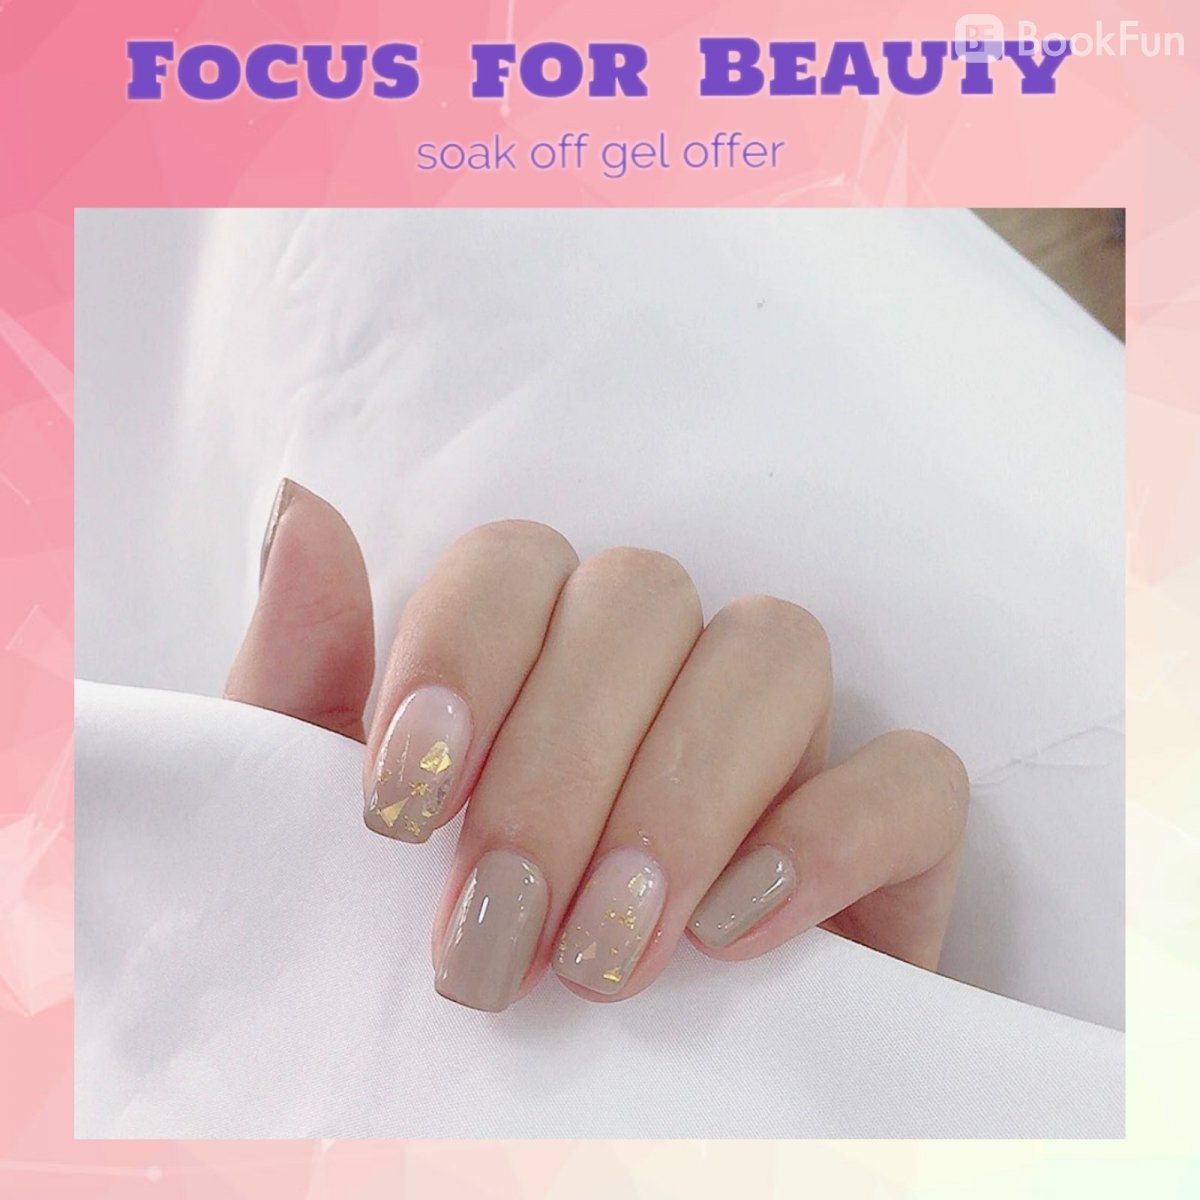 Focus for Beauty